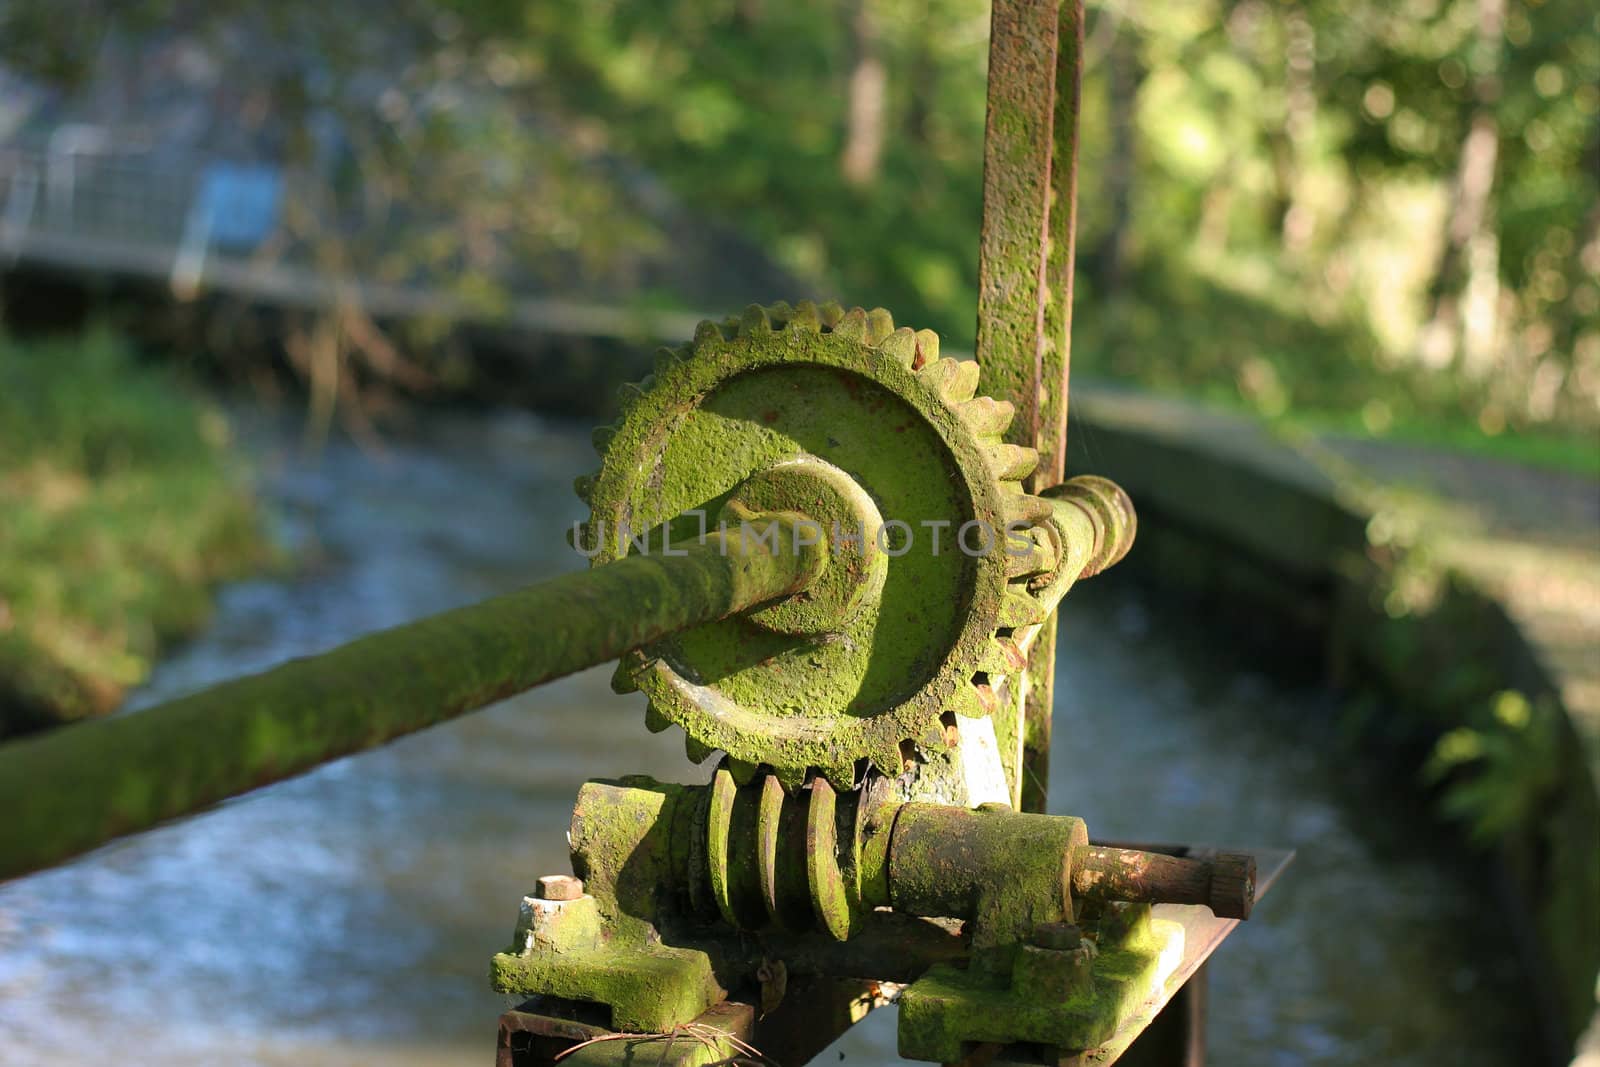 Weir mechanism of an old weir on a small river - View details